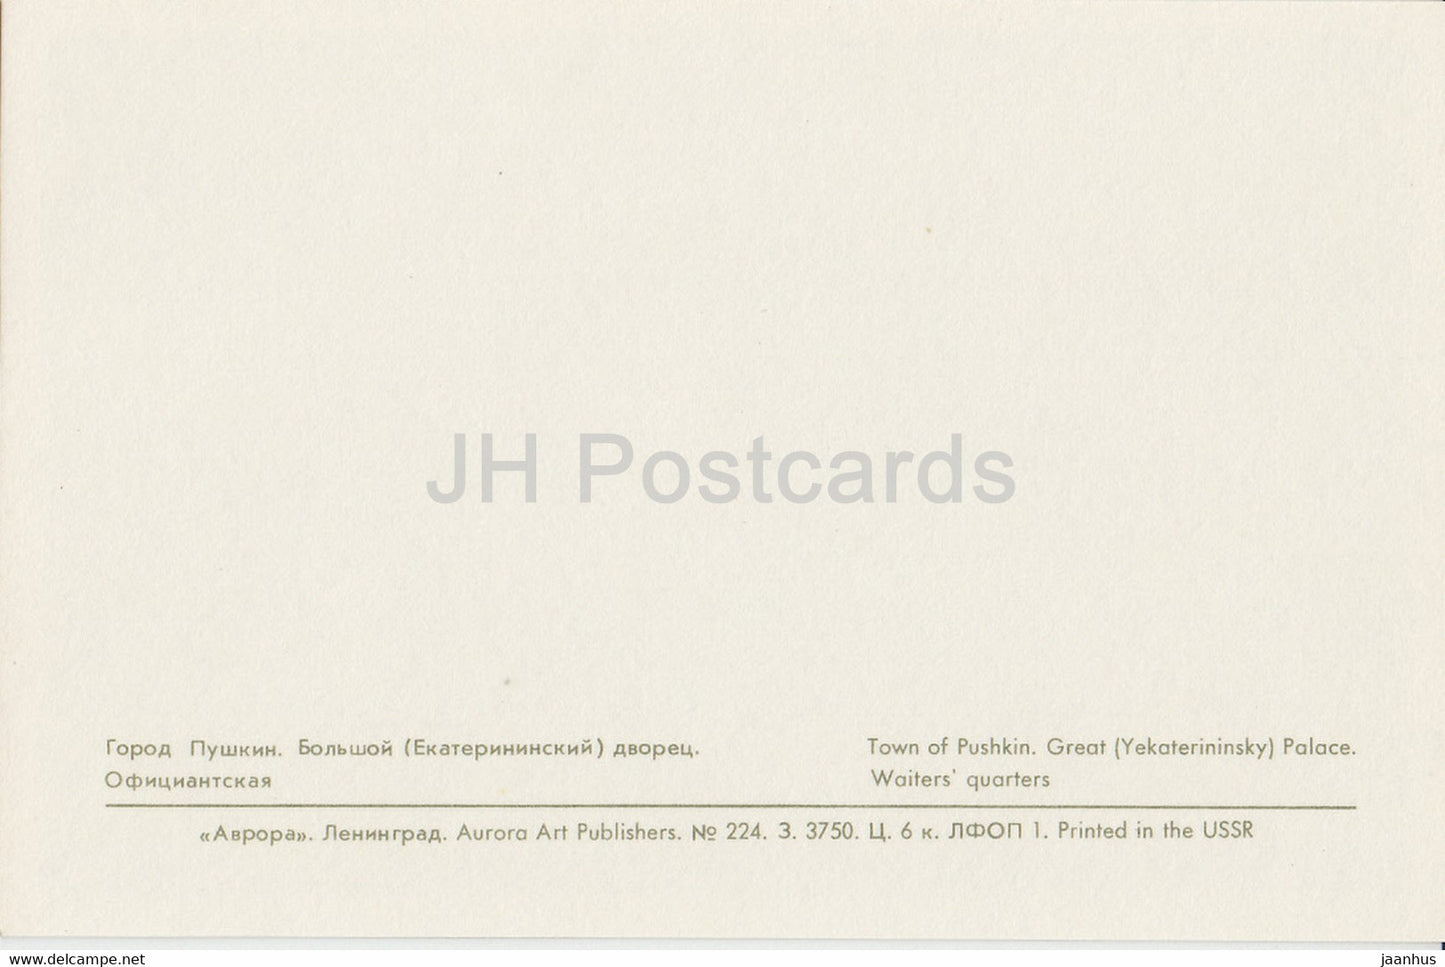 Town of Pushkin - Great (Yekaterinsky) Palace - Waiters quarters - 1971 - Russia USSR - unused